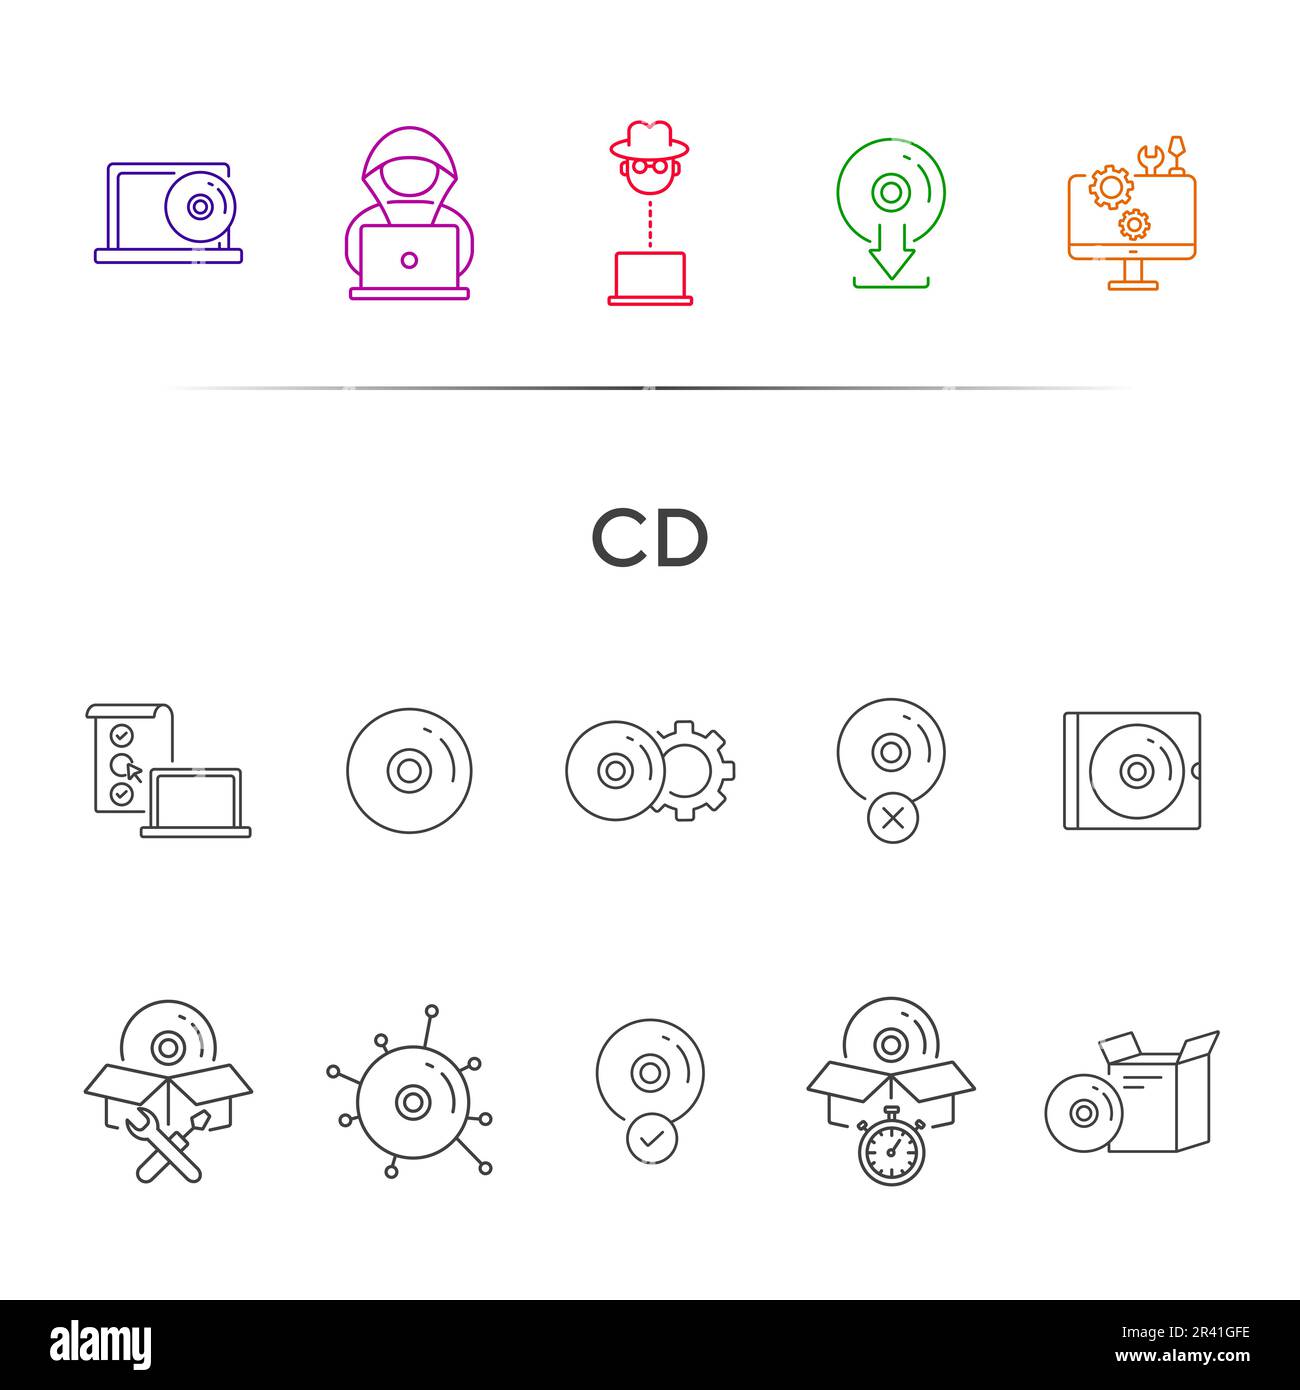 CD icons Stock Vector